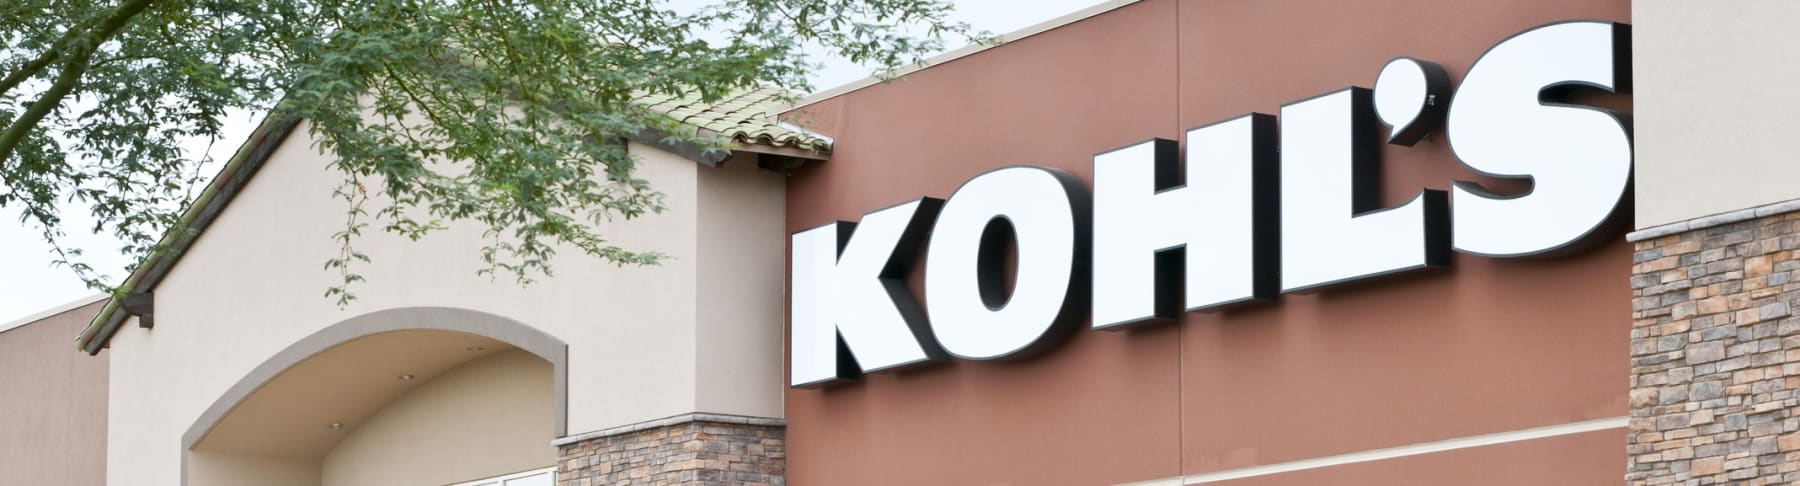 Kohl's sign on exterior of store.